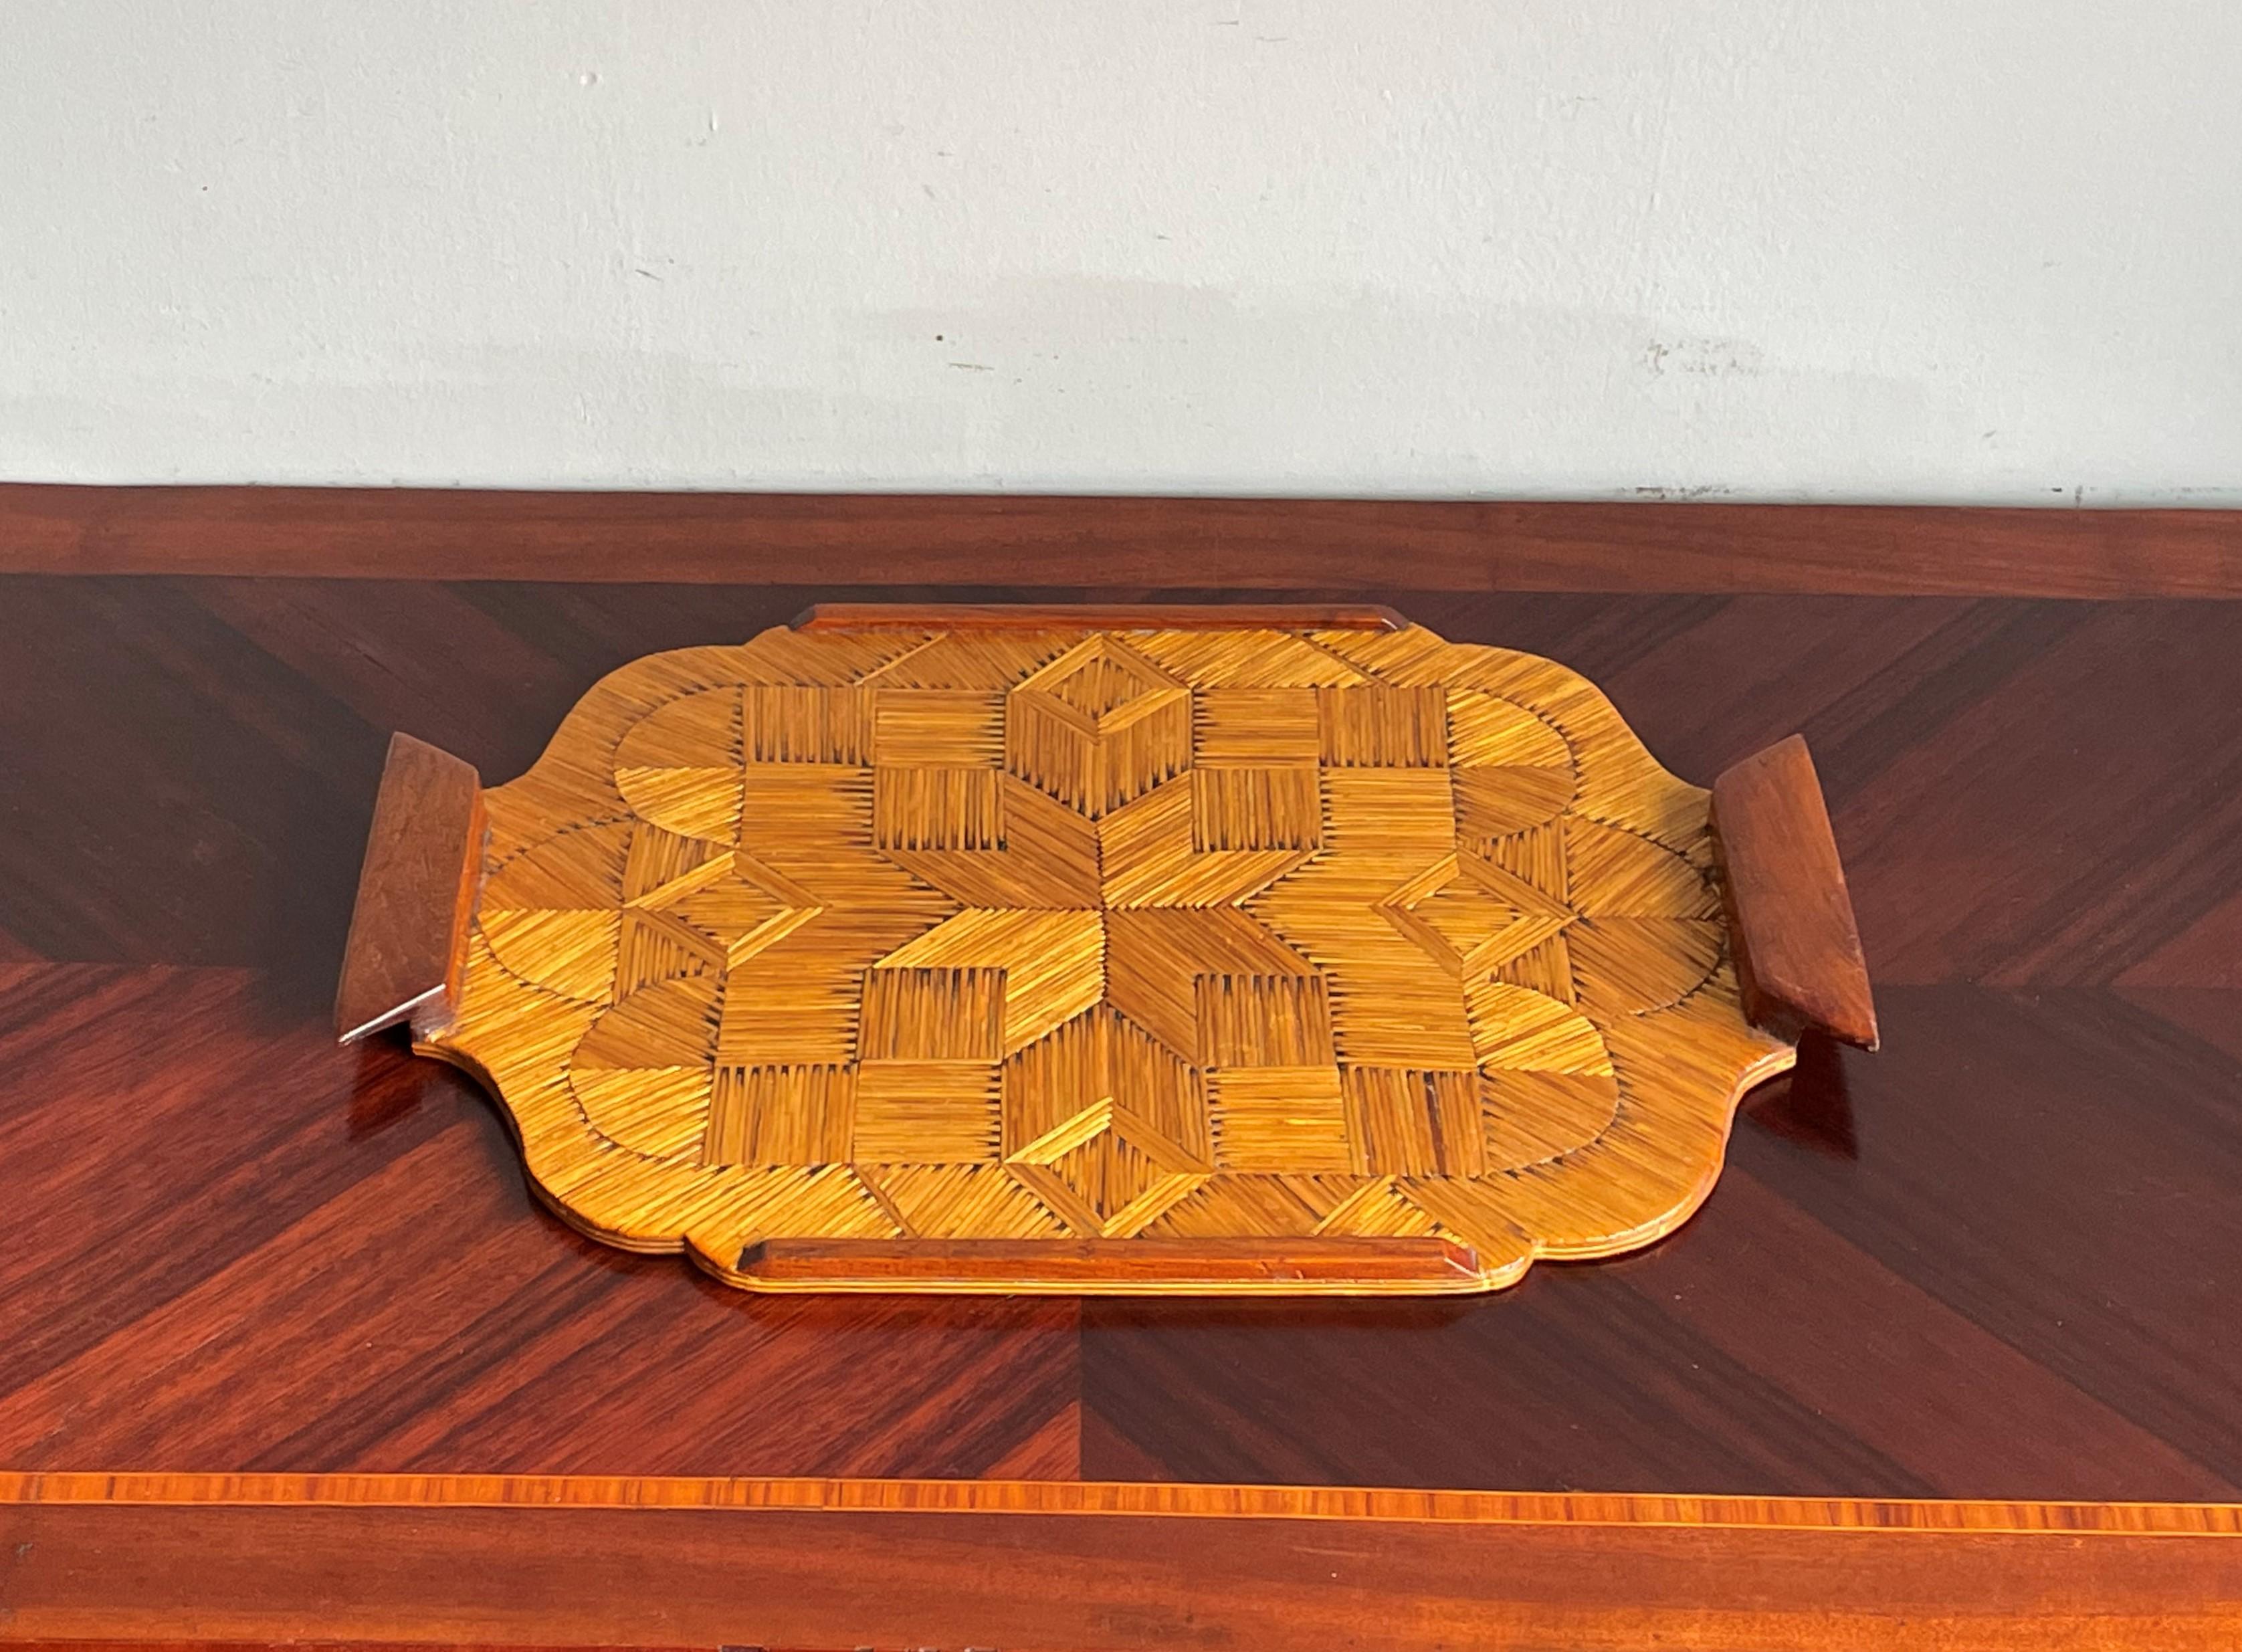 Unique midcentury folk art serving tray in superb condition.

Folk Art made of burnt matches is rare art and we have never seen a piece of this design, let alone in this amazing condition. This museum quality serving tray has been looked after